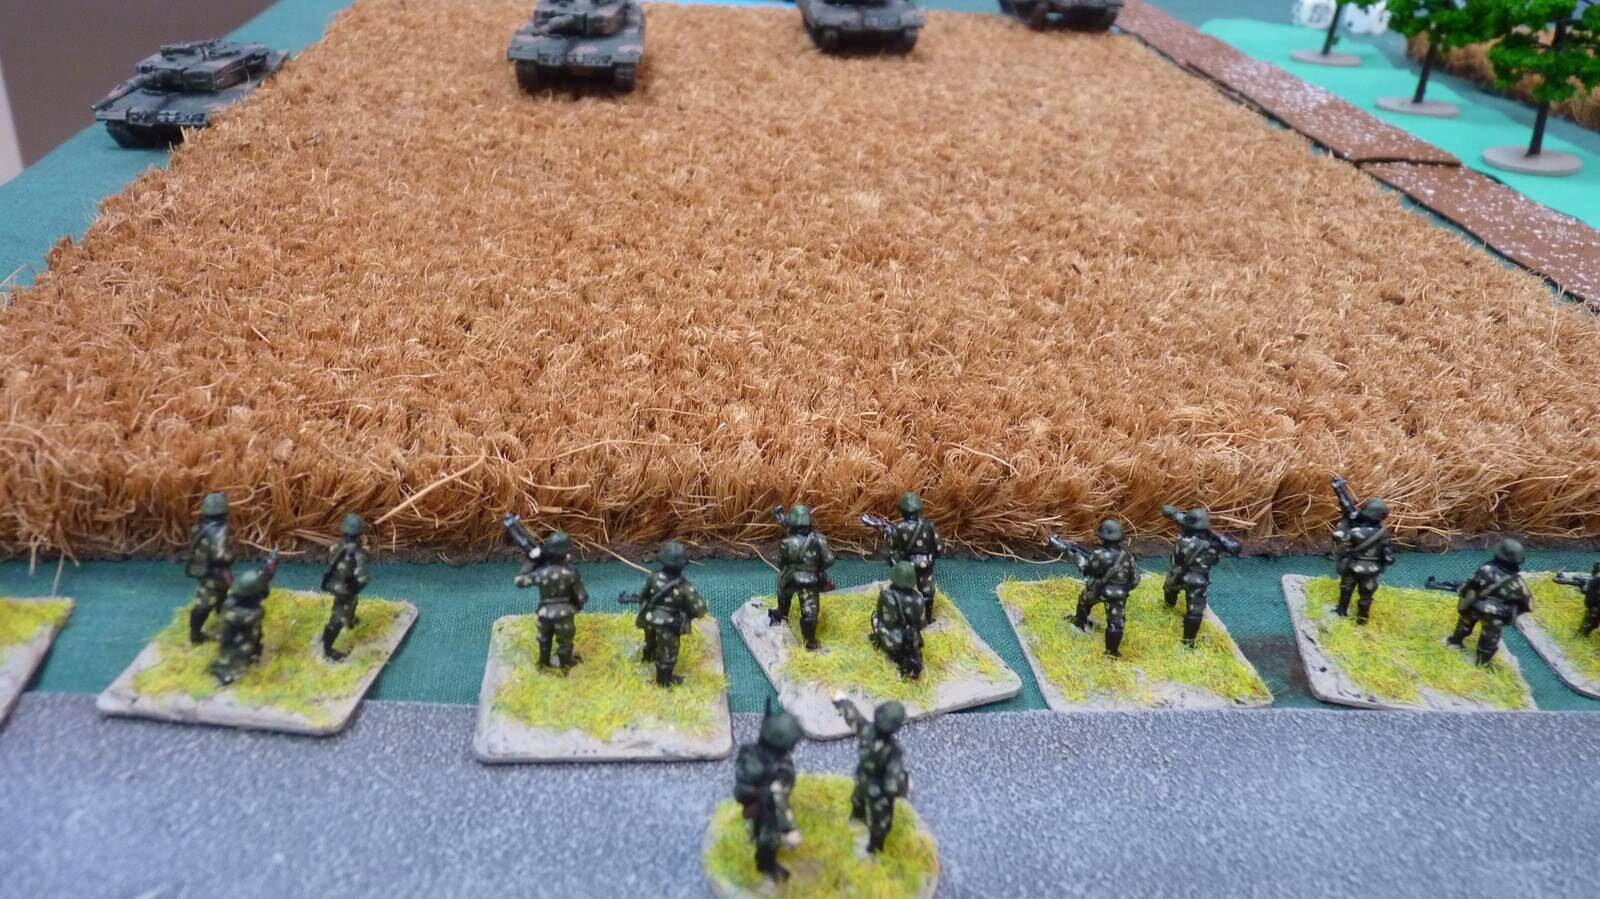 Excellent German optics revealed a Soviet infantry platoon lying in wait on the other side of the field.